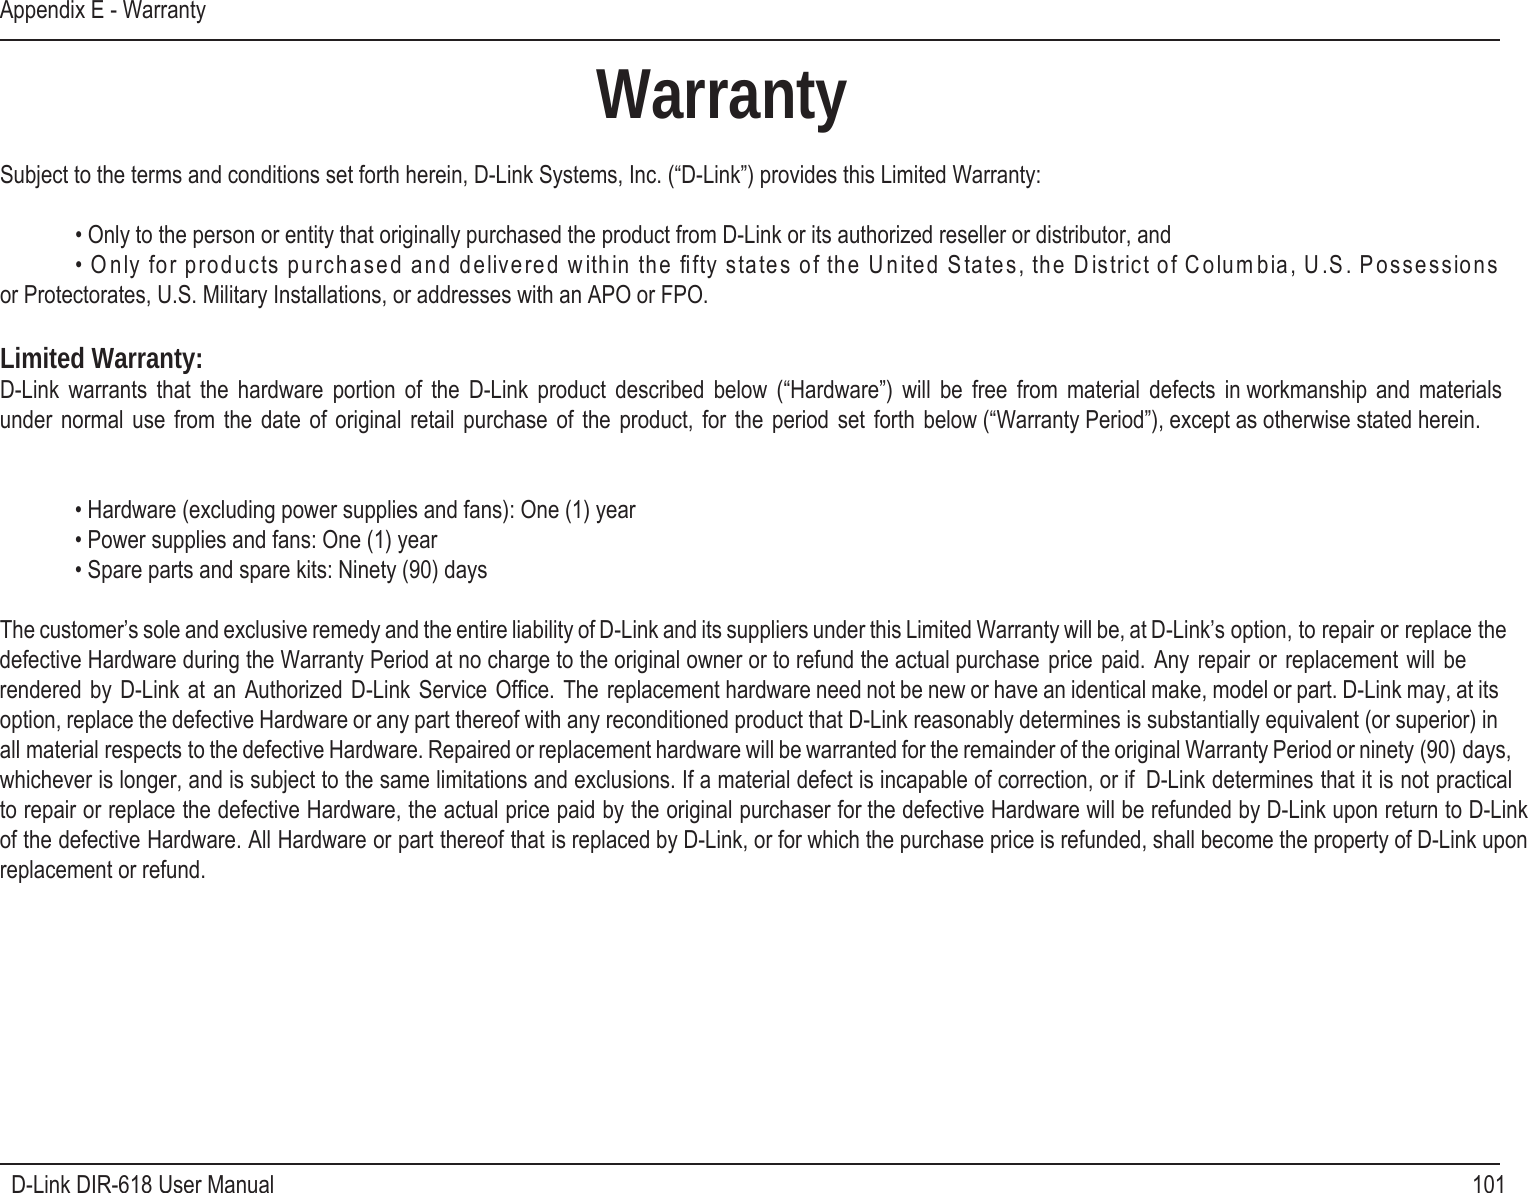 101D-Link DIR-618 User ManualAppendix E - WarrantyWarrantySubject to the terms and conditions set forth herein, D-Link Systems, Inc. (“D-Link”) provides this Limited Warranty: • Only to the person or entity that originally purchased the product from D-Link or its authorized reseller or distributor, and     snoissessoP .S.U ,aibmuloC fo tcirtsiD eht ,setatS detinU eht fo setats ytfﬁ eht nihtiw dereviled dna desahcrup stcudorp rof ylnO •or Protectorates, U.S. Military Installations, or addresses with an APO or FPO.Limited Warranty:D-Link  warrants  that  the hardware portion  of  the D-Link  product  described below (“Hardware”) will be  free  from material defects  in workmanship  and  materials under  normal  use  from  the  date  of  original retail  purchase  of  the  product,  for  the  period  set  forth  below (“Warranty Period”), except as otherwise stated herein.   • Hardware (excluding power supplies and fans): One (1) year • Power supplies and fans: One (1) year • Spare parts and spare kits: Ninety (90) daysThe customer’s sole and exclusive remedy and the entire liability of D-Link and its suppliers under this Limited Warranty will be, at D-Link’s option, to repair or replace thedefective Hardware during the Warranty Period at no charge to the original owner or to refund the actual purchase  price  paid. Any  repair  or replacement  will  be rendered by  D-Link at an  Authorized D-Link  Service  Ofﬁce. The  replacement hardware need not be new or have an identical make, model or part. D-Link may, at its option, replace the defective Hardware or any part thereof with any reconditioned product that D-Link reasonably determines is substantially equivalent (or superior) in all material respects to the defective Hardware. Repaired or replacement hardware will be warranted for the remainder of the original Warranty Period or ninety (90) days, whichever is longer, and is subject to the same limitations and exclusions. If a material defect is incapable of correction, or if  D-Link determines that it is not practical to repair or replace the defective Hardware, the actual price paid by the original purchaser for the defective Hardware will be refunded by D-Link upon return to D-Link of the defective Hardware. All Hardware or part thereof that is replaced by D-Link, or for which the purchase price is refunded, shall become the property of D-Link uponreplacement or refund.   